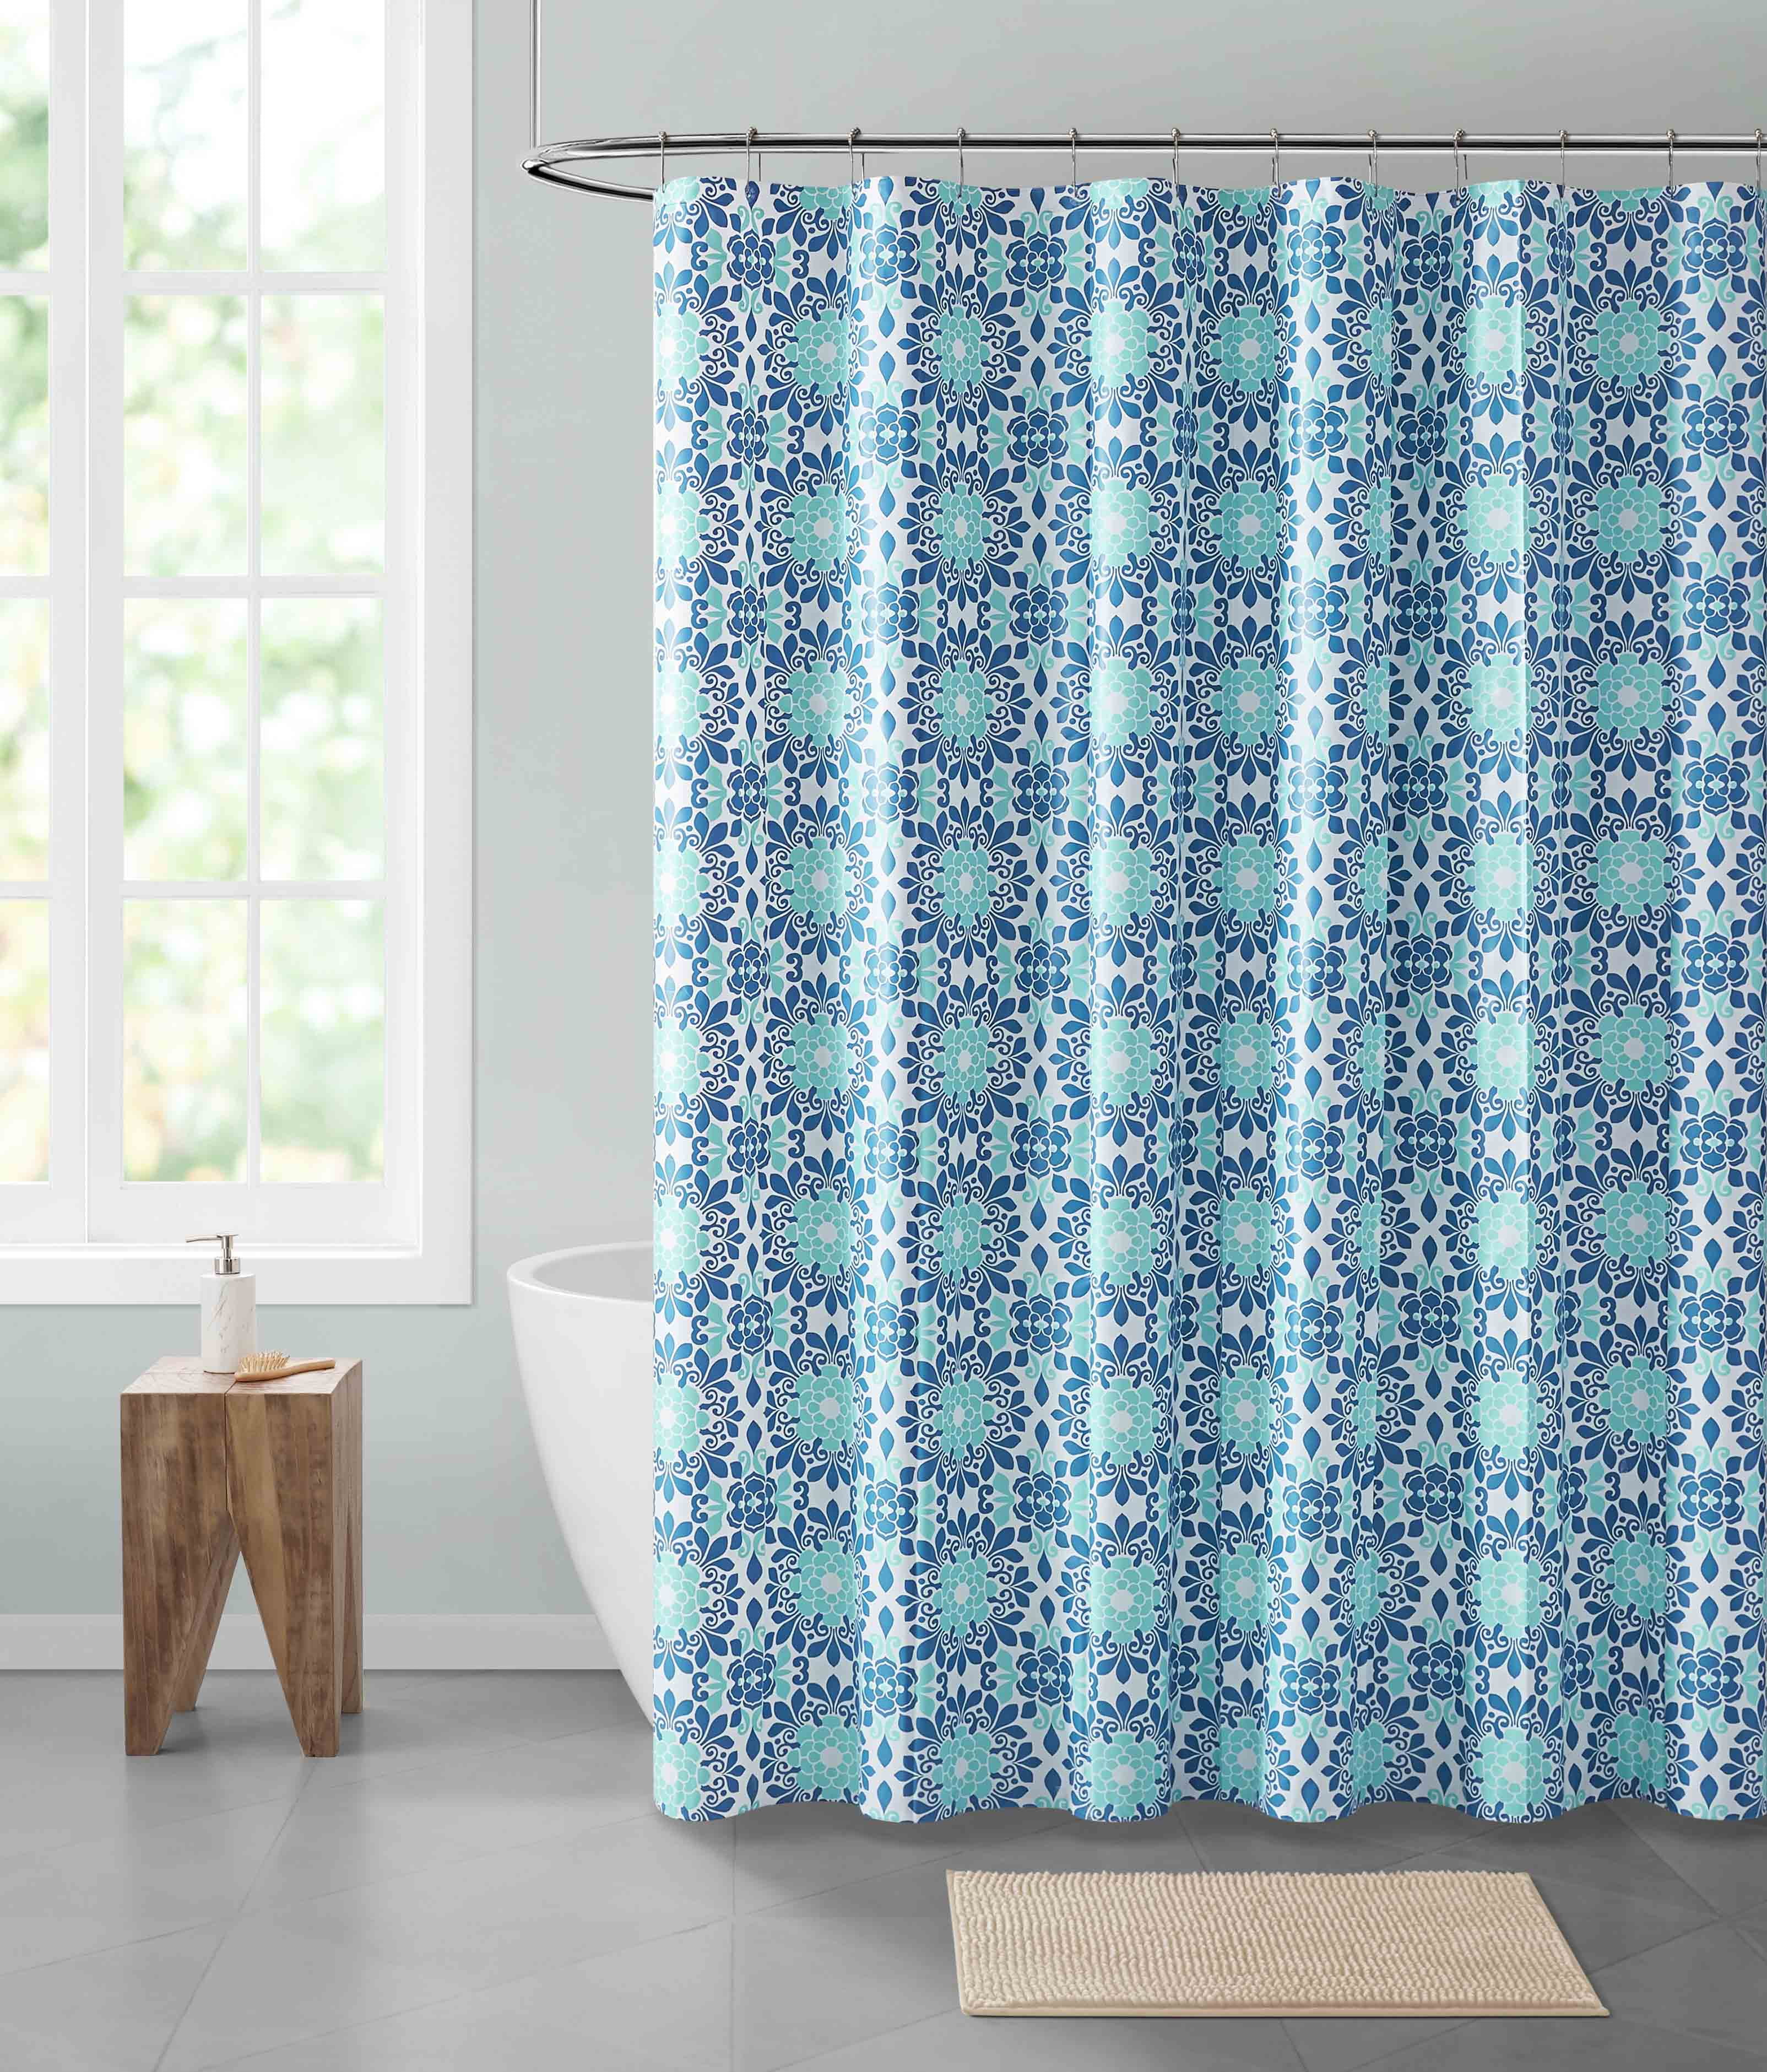 Soft Non-Toxic PEVA Shower Curtain Liner w/ magnets Mildew Resist Eco-Friendly 